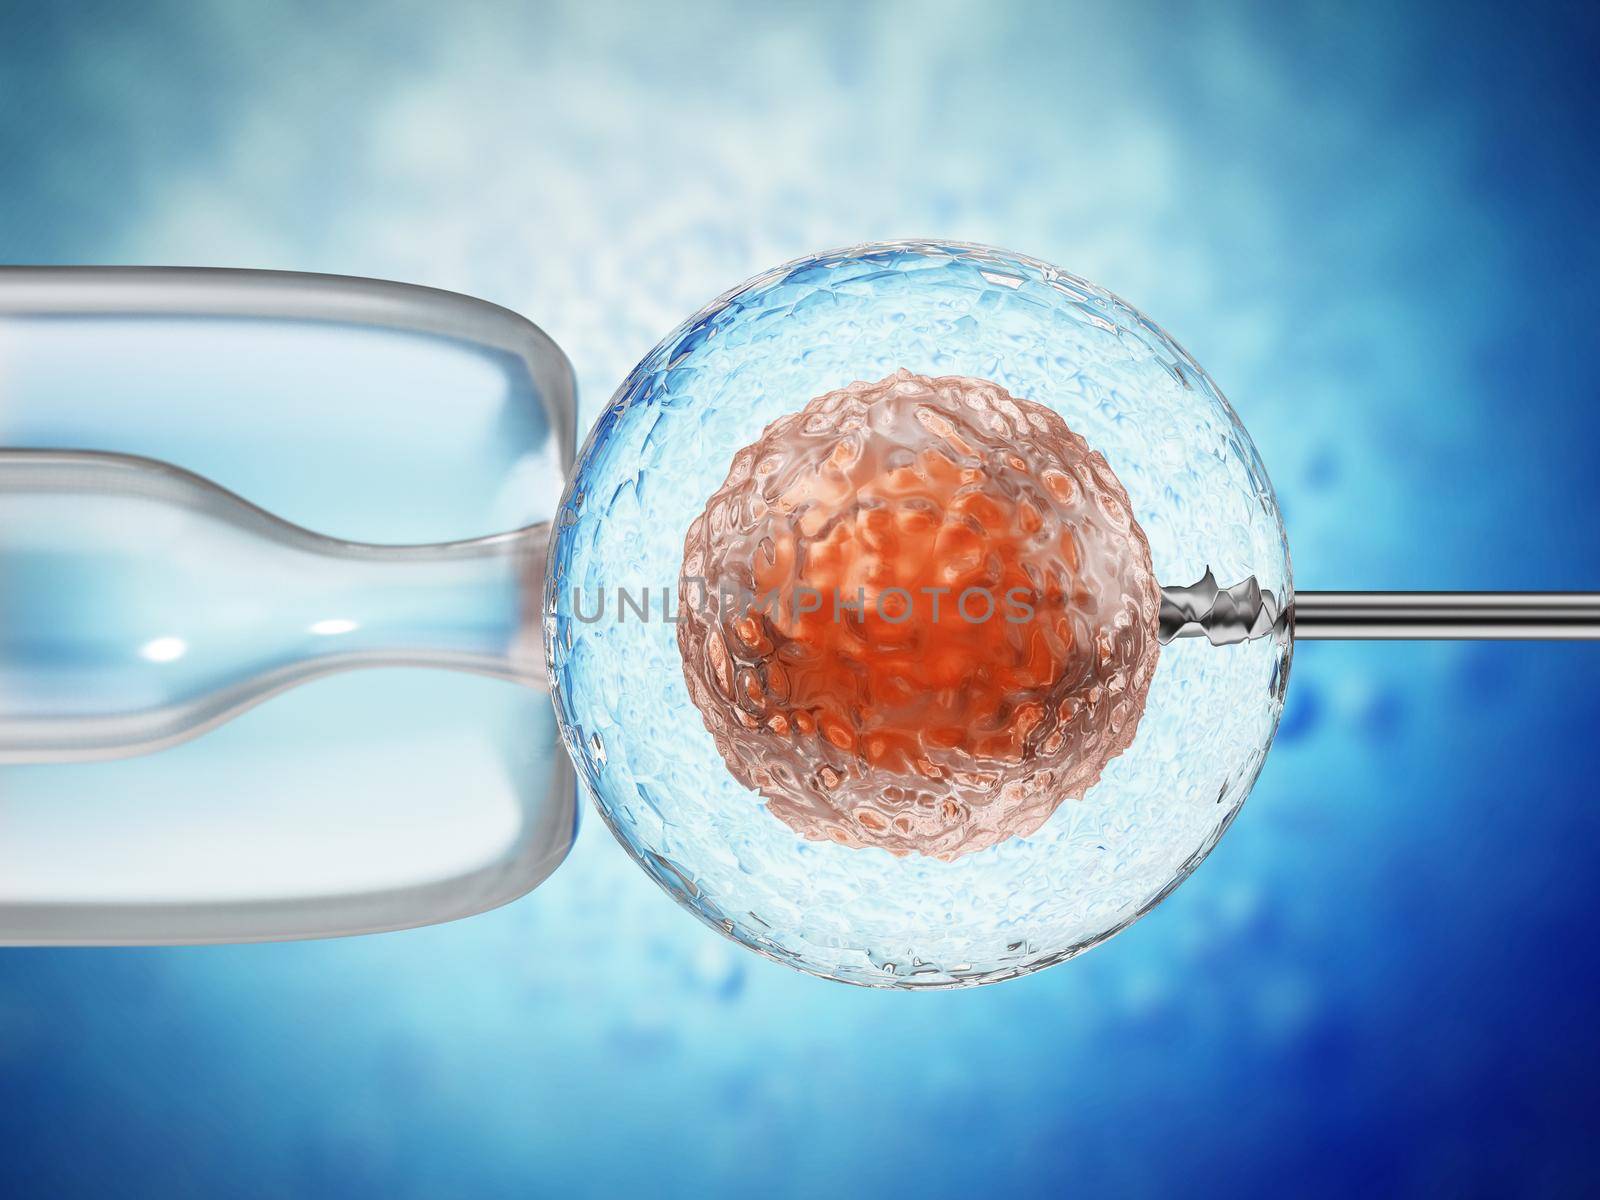 3D illustration of artificial insemination process showings sperms being injected inside the ovule. 3D illustration by Simsek